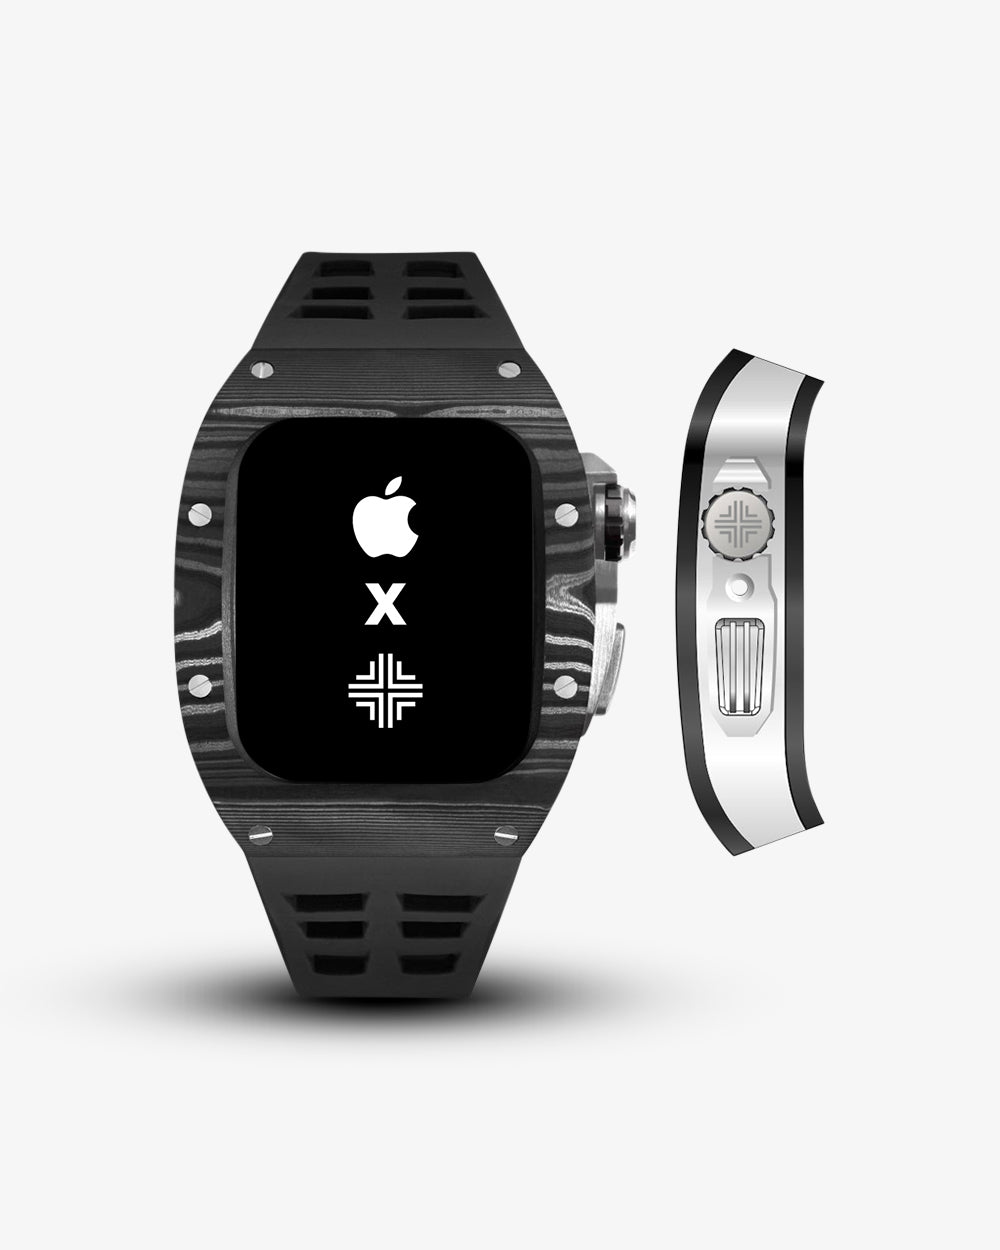 Swiss Concept Racing Elite Edition Nero Forged Carbon, Stainless Steel & Onyx Black Apple Watch Case - Precision Engineered